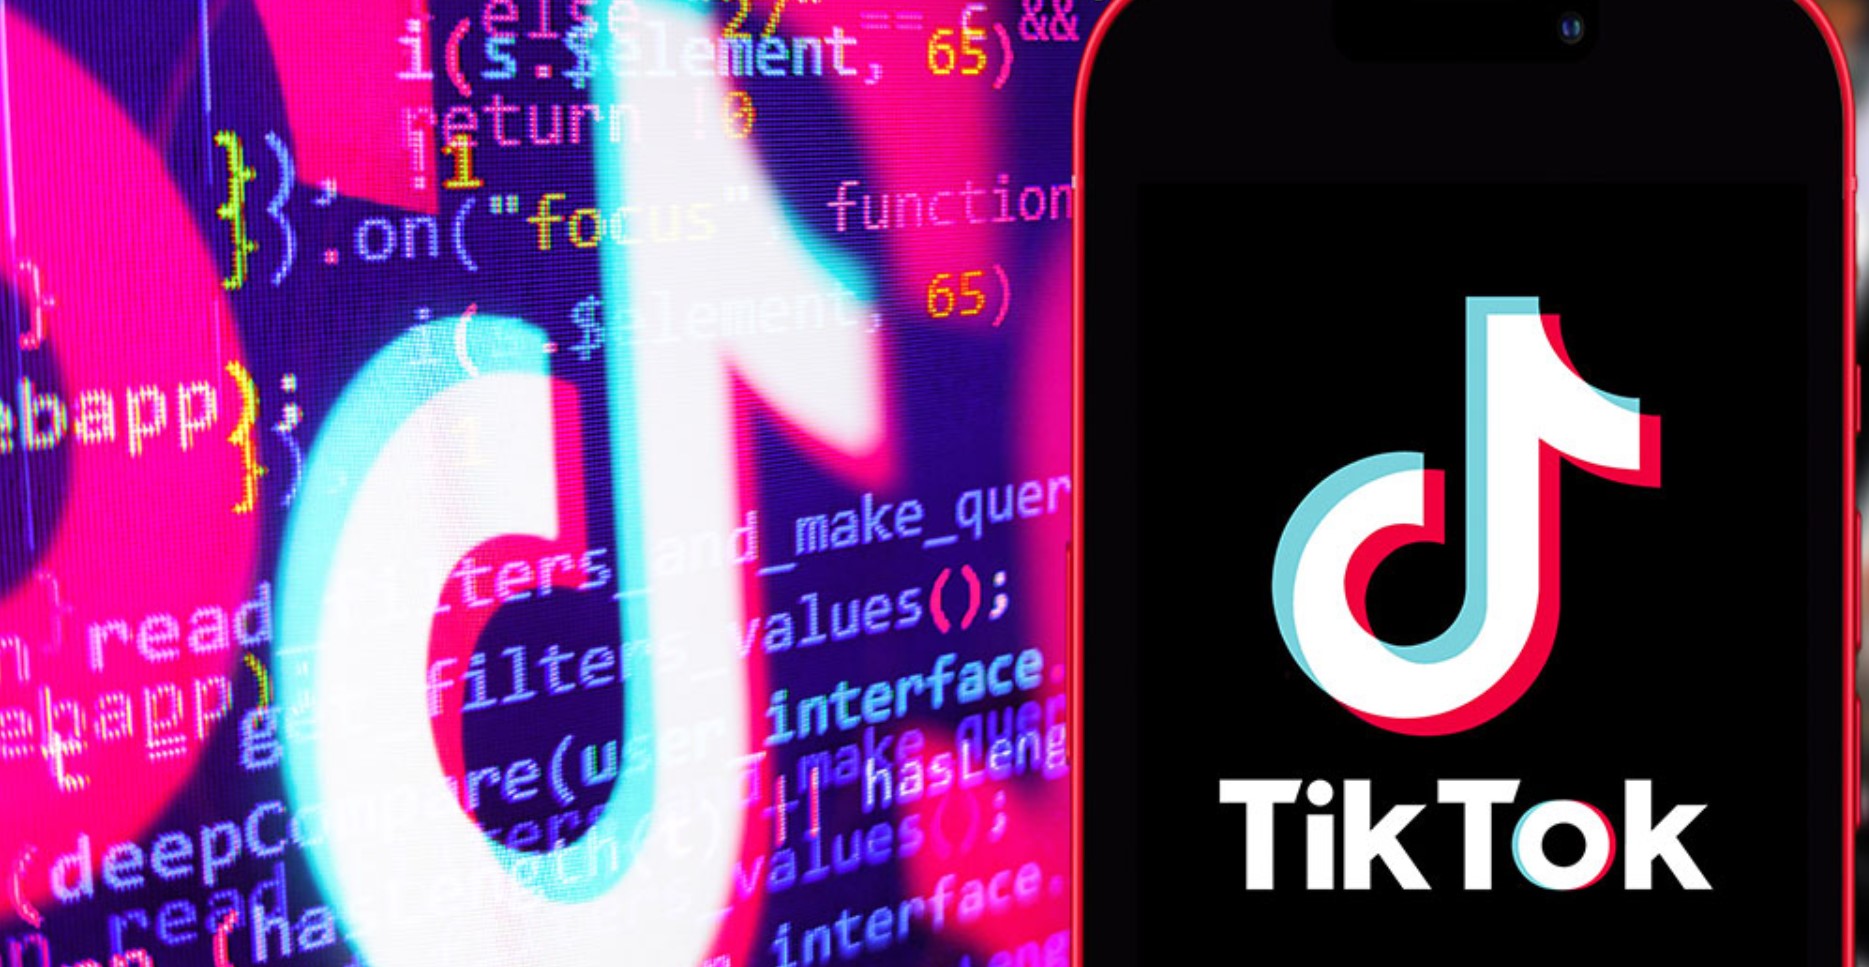 Creating TikTok Collections: Organizing Your Shared Videos